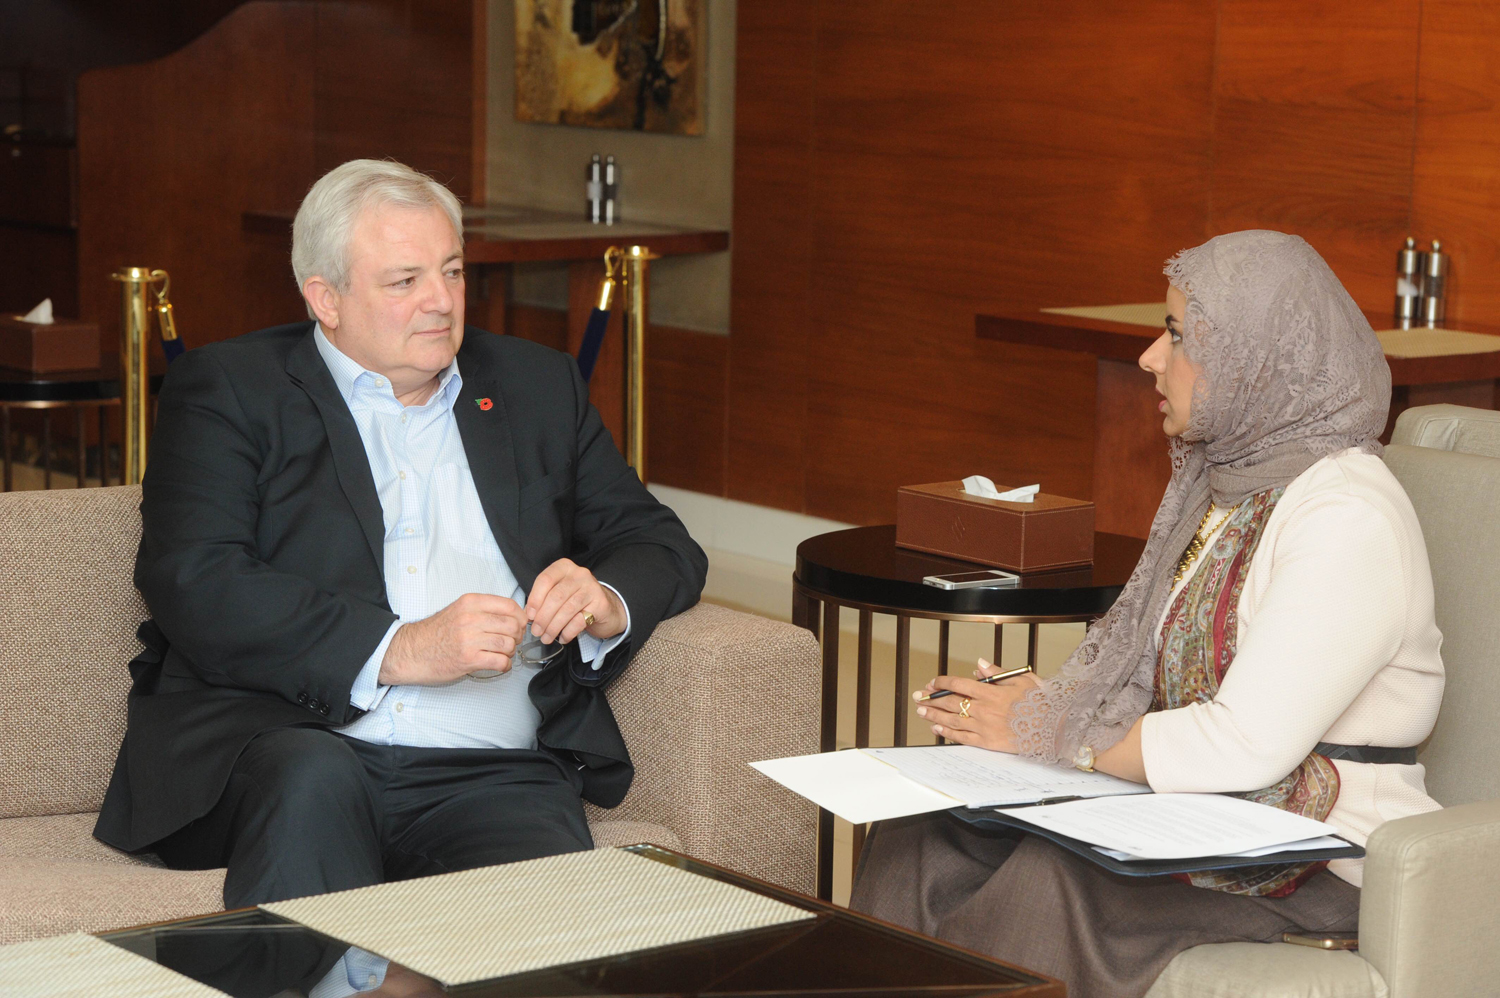 UN Undersecretary General for Humanitarian Affairs and Emergency Relief Coordinator Stephen O'Brien in an interview with Kuwait News Agency (KUNA)